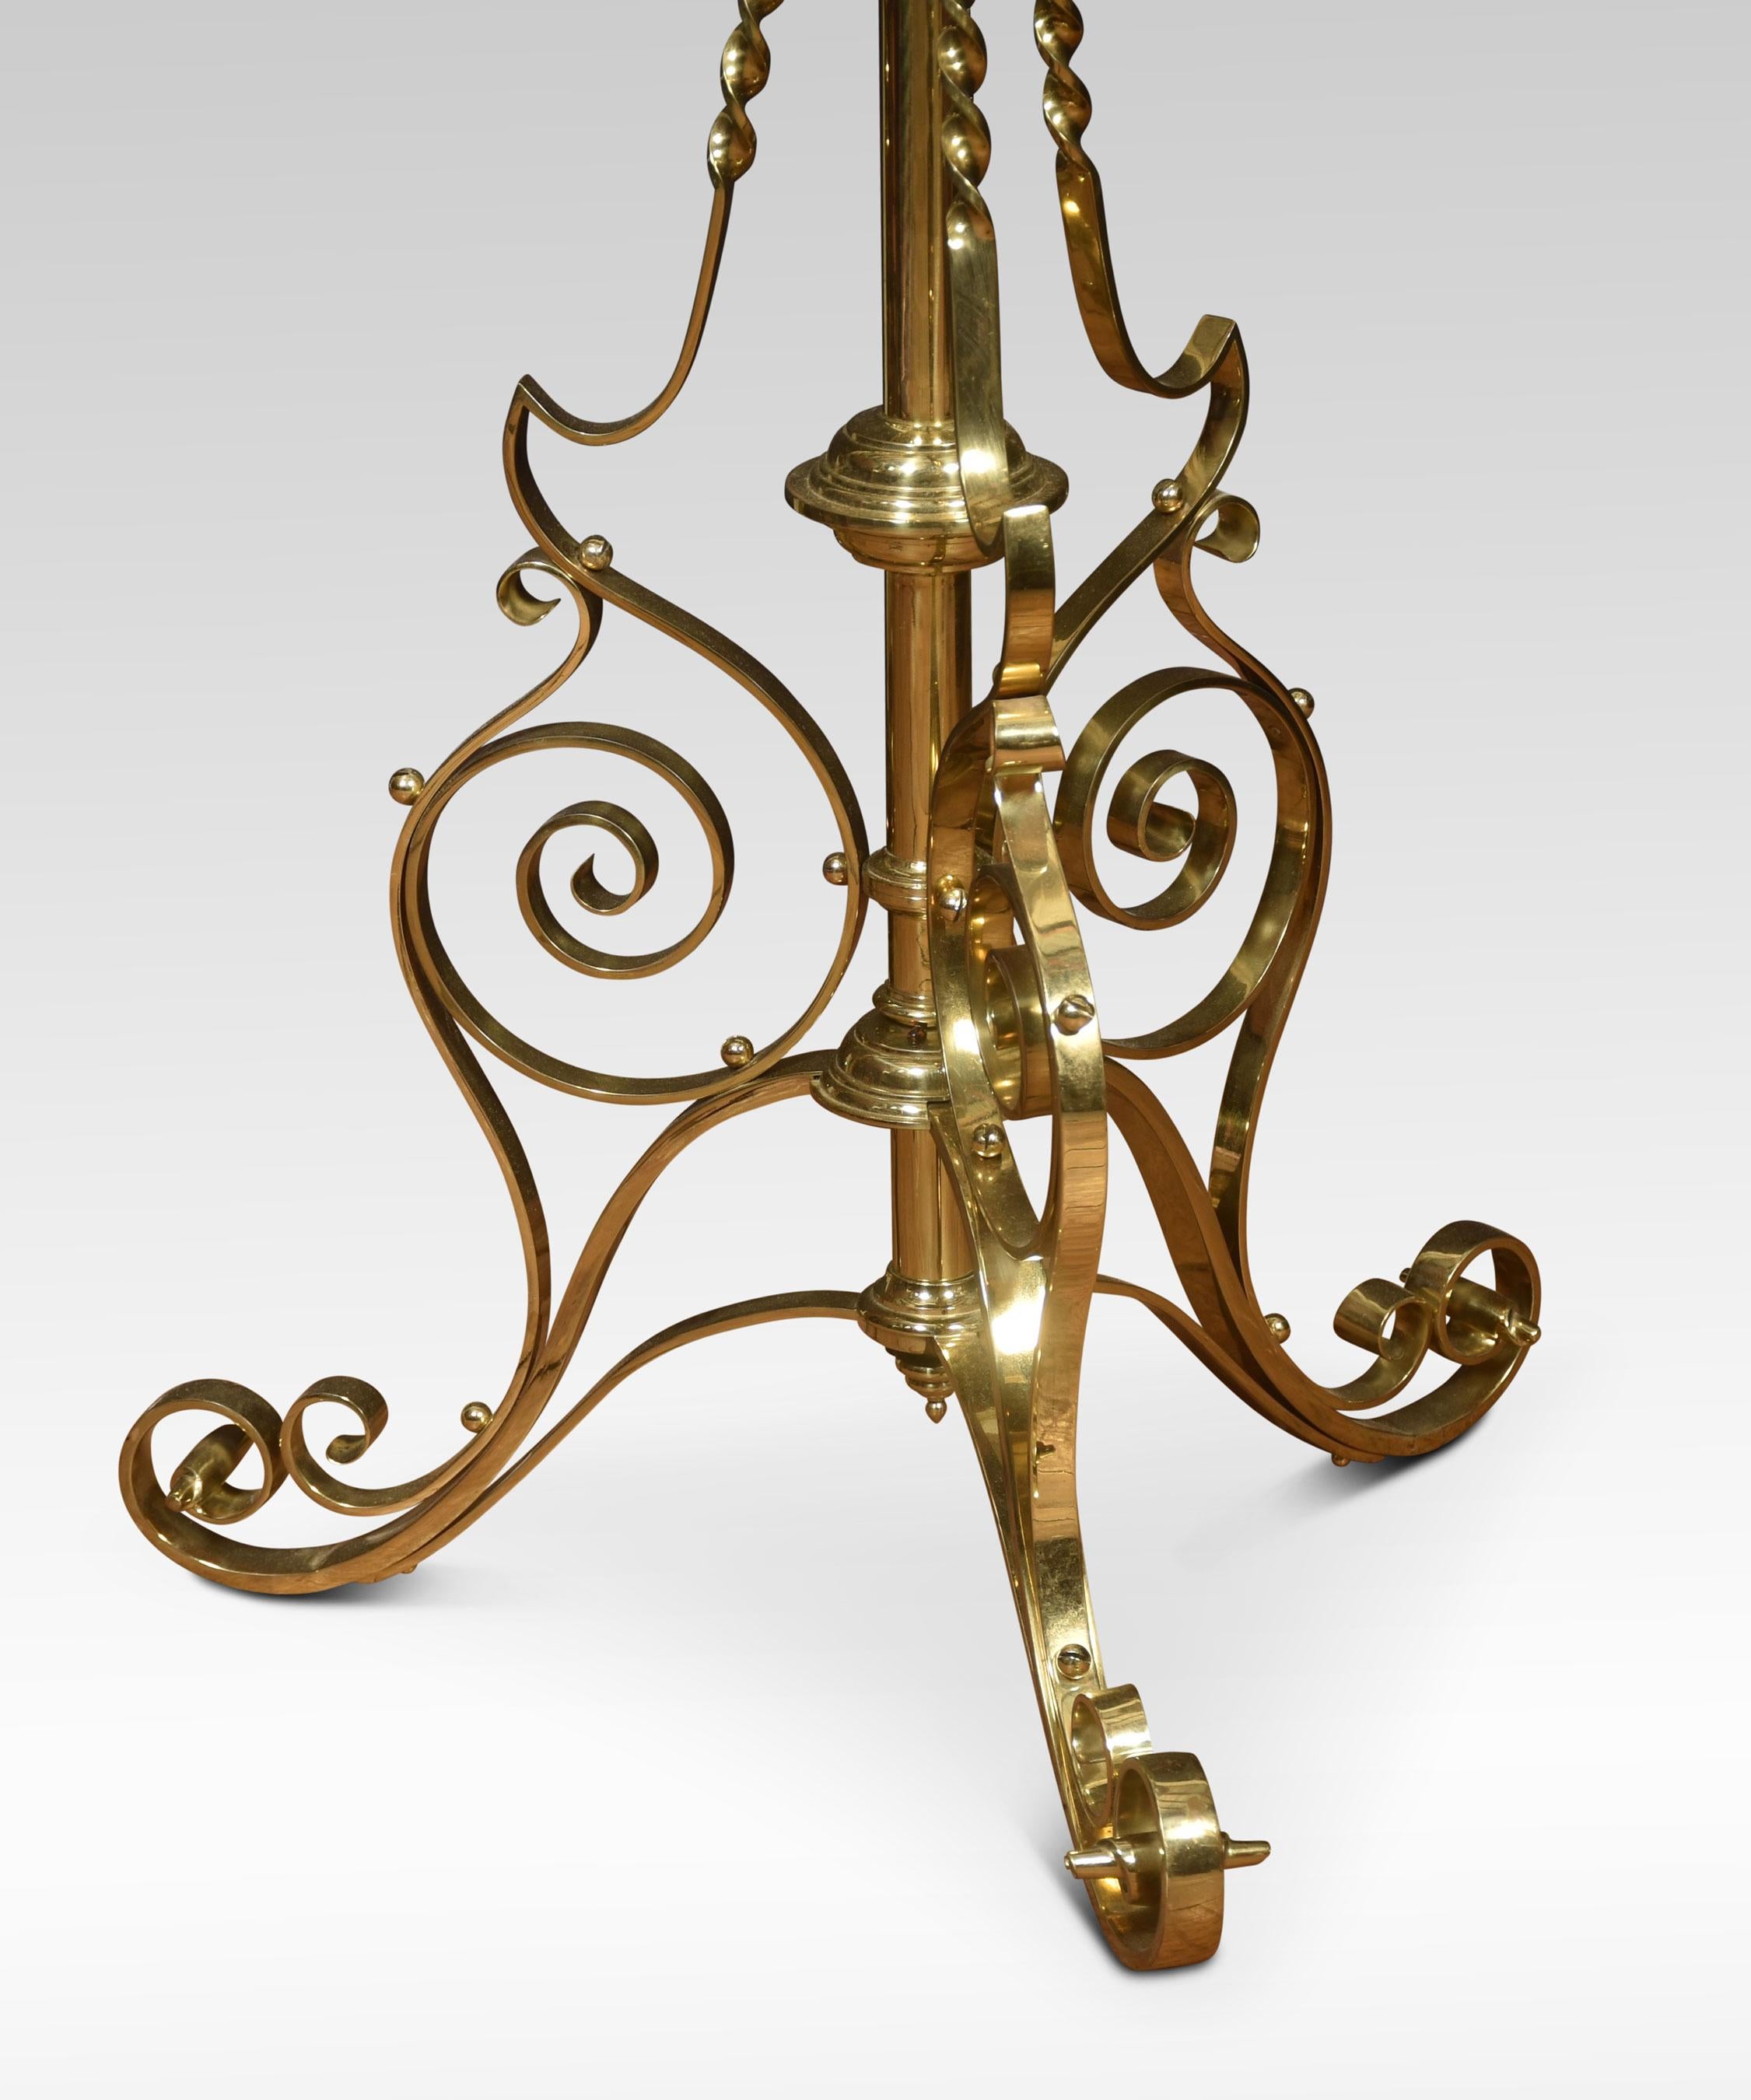 Brass standard lamp, with circular adjustable column, on shaped splayed base. Terminating in scrolling toes.
Dimensions
Height 48.5 inches ajustable to 69 inches
Width 20.5 inches
Depth 20.5 inches.